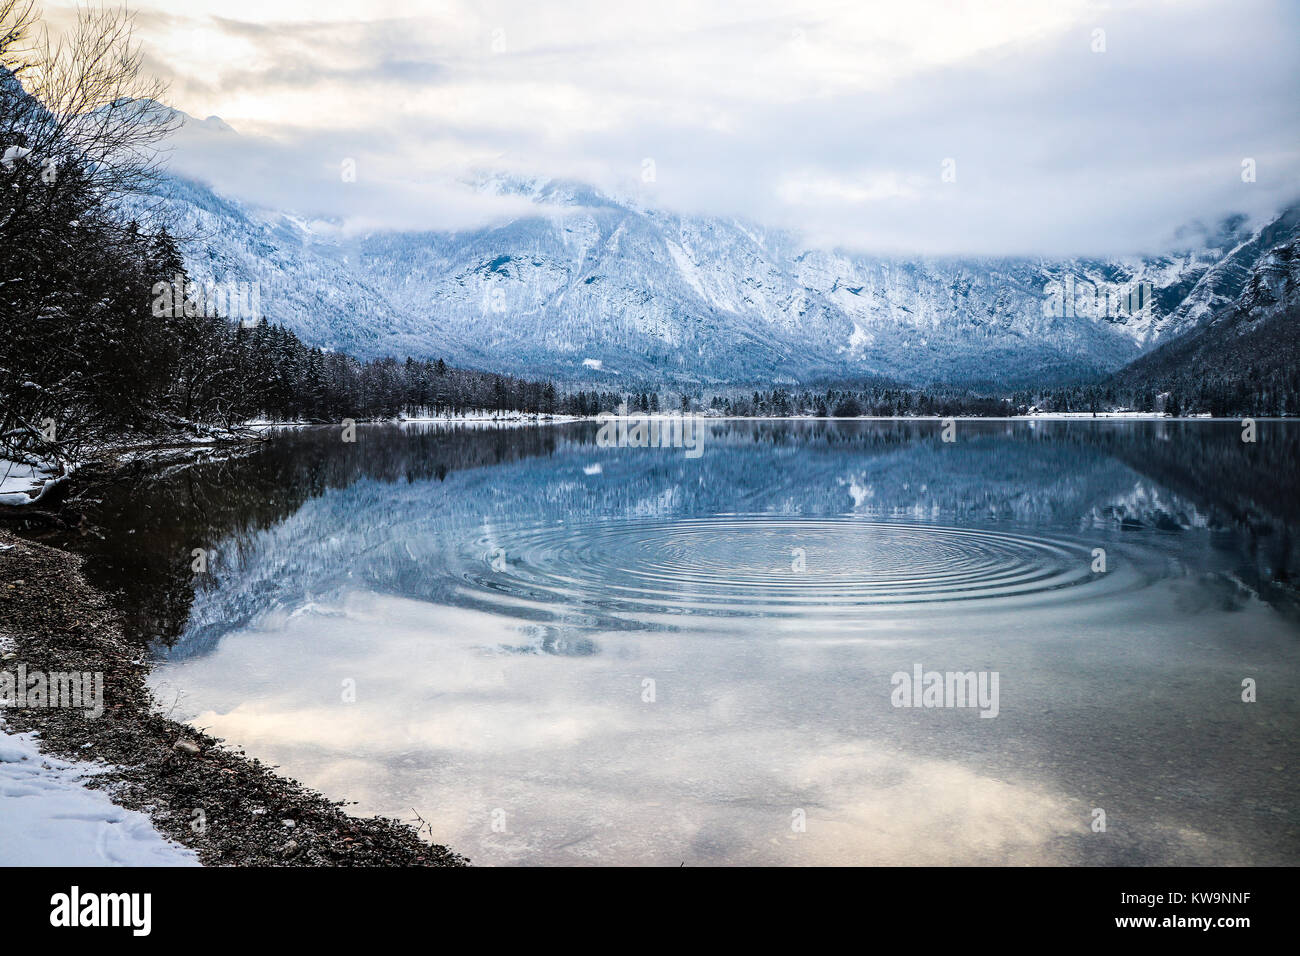 The stunning serenity of Lake Bohinj, Slovenia, is captured in this wonderful image, perfect to adorn the front of a Christmas card or postcard. Stock Photo